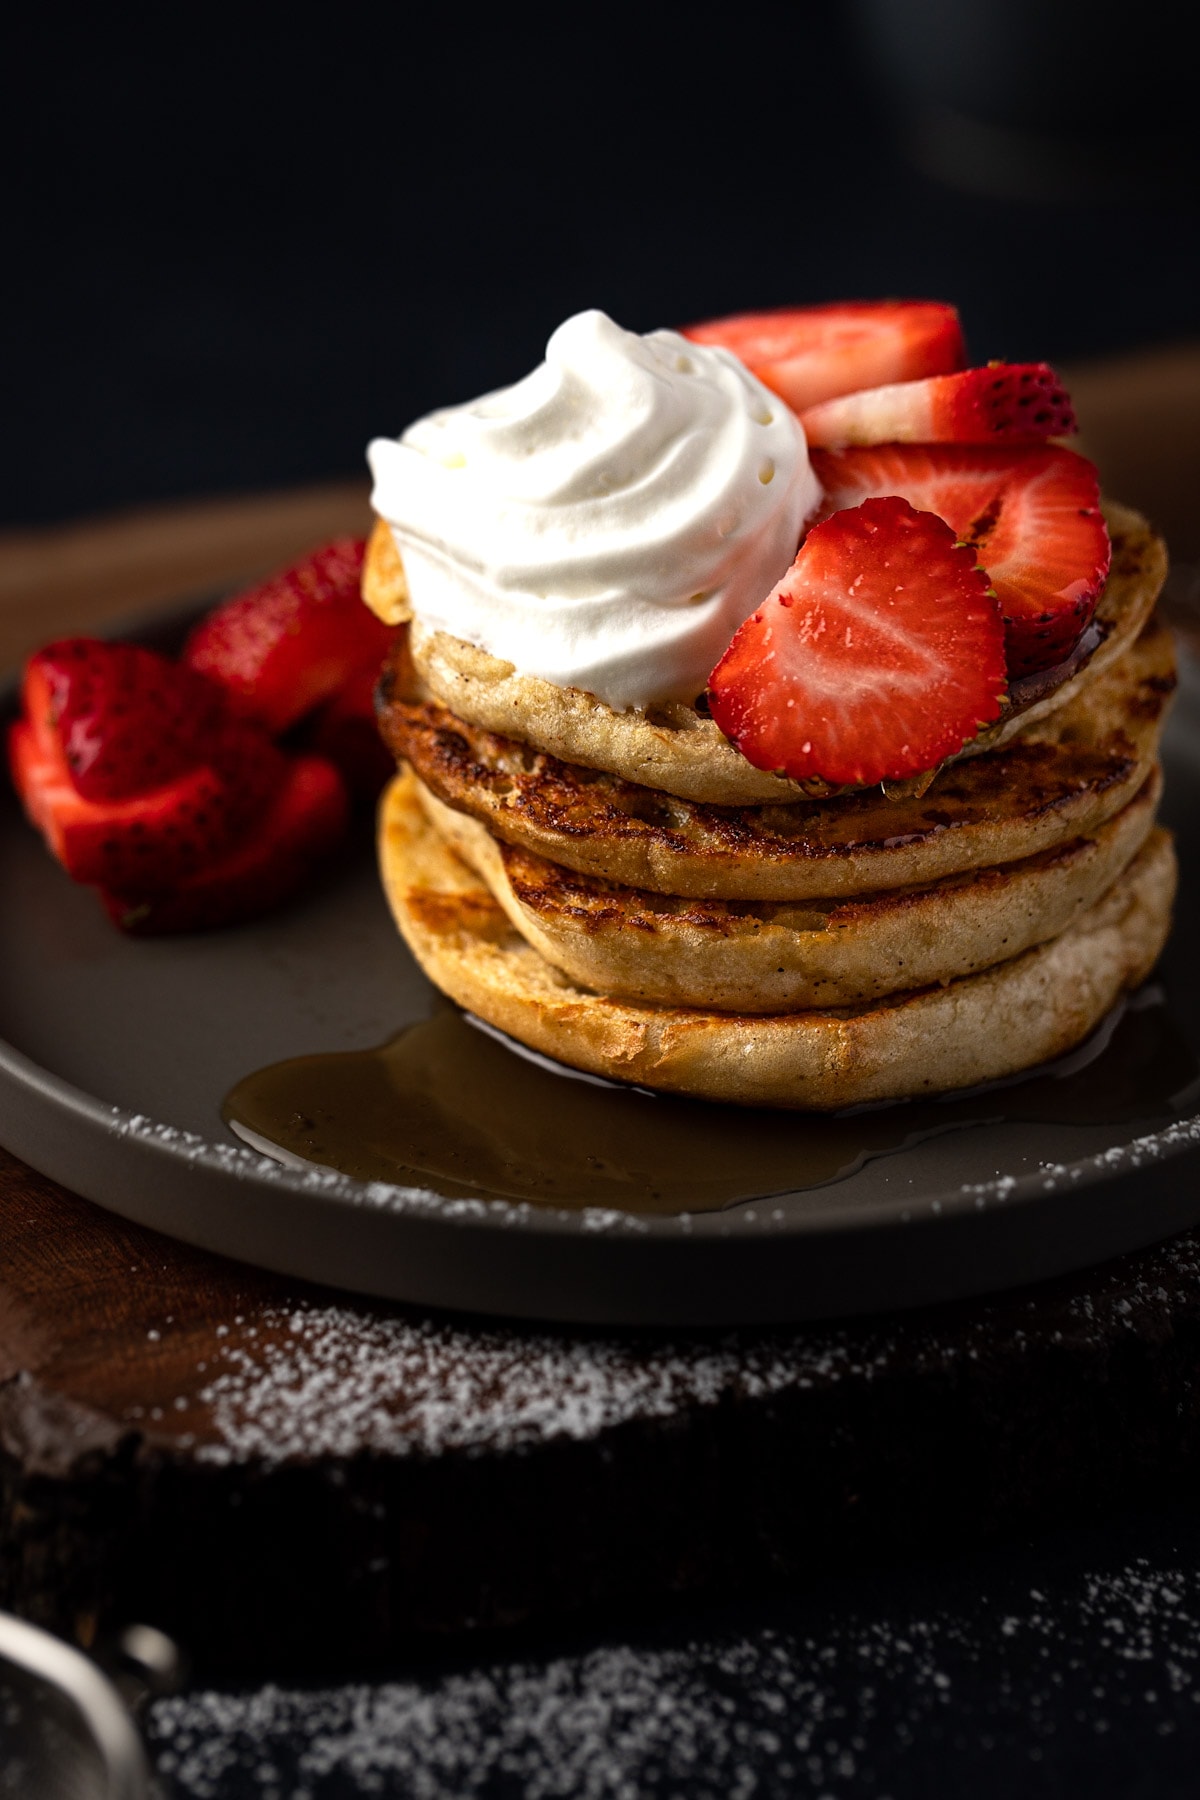 A stack of English muffins topped with whipped cream and fruit.